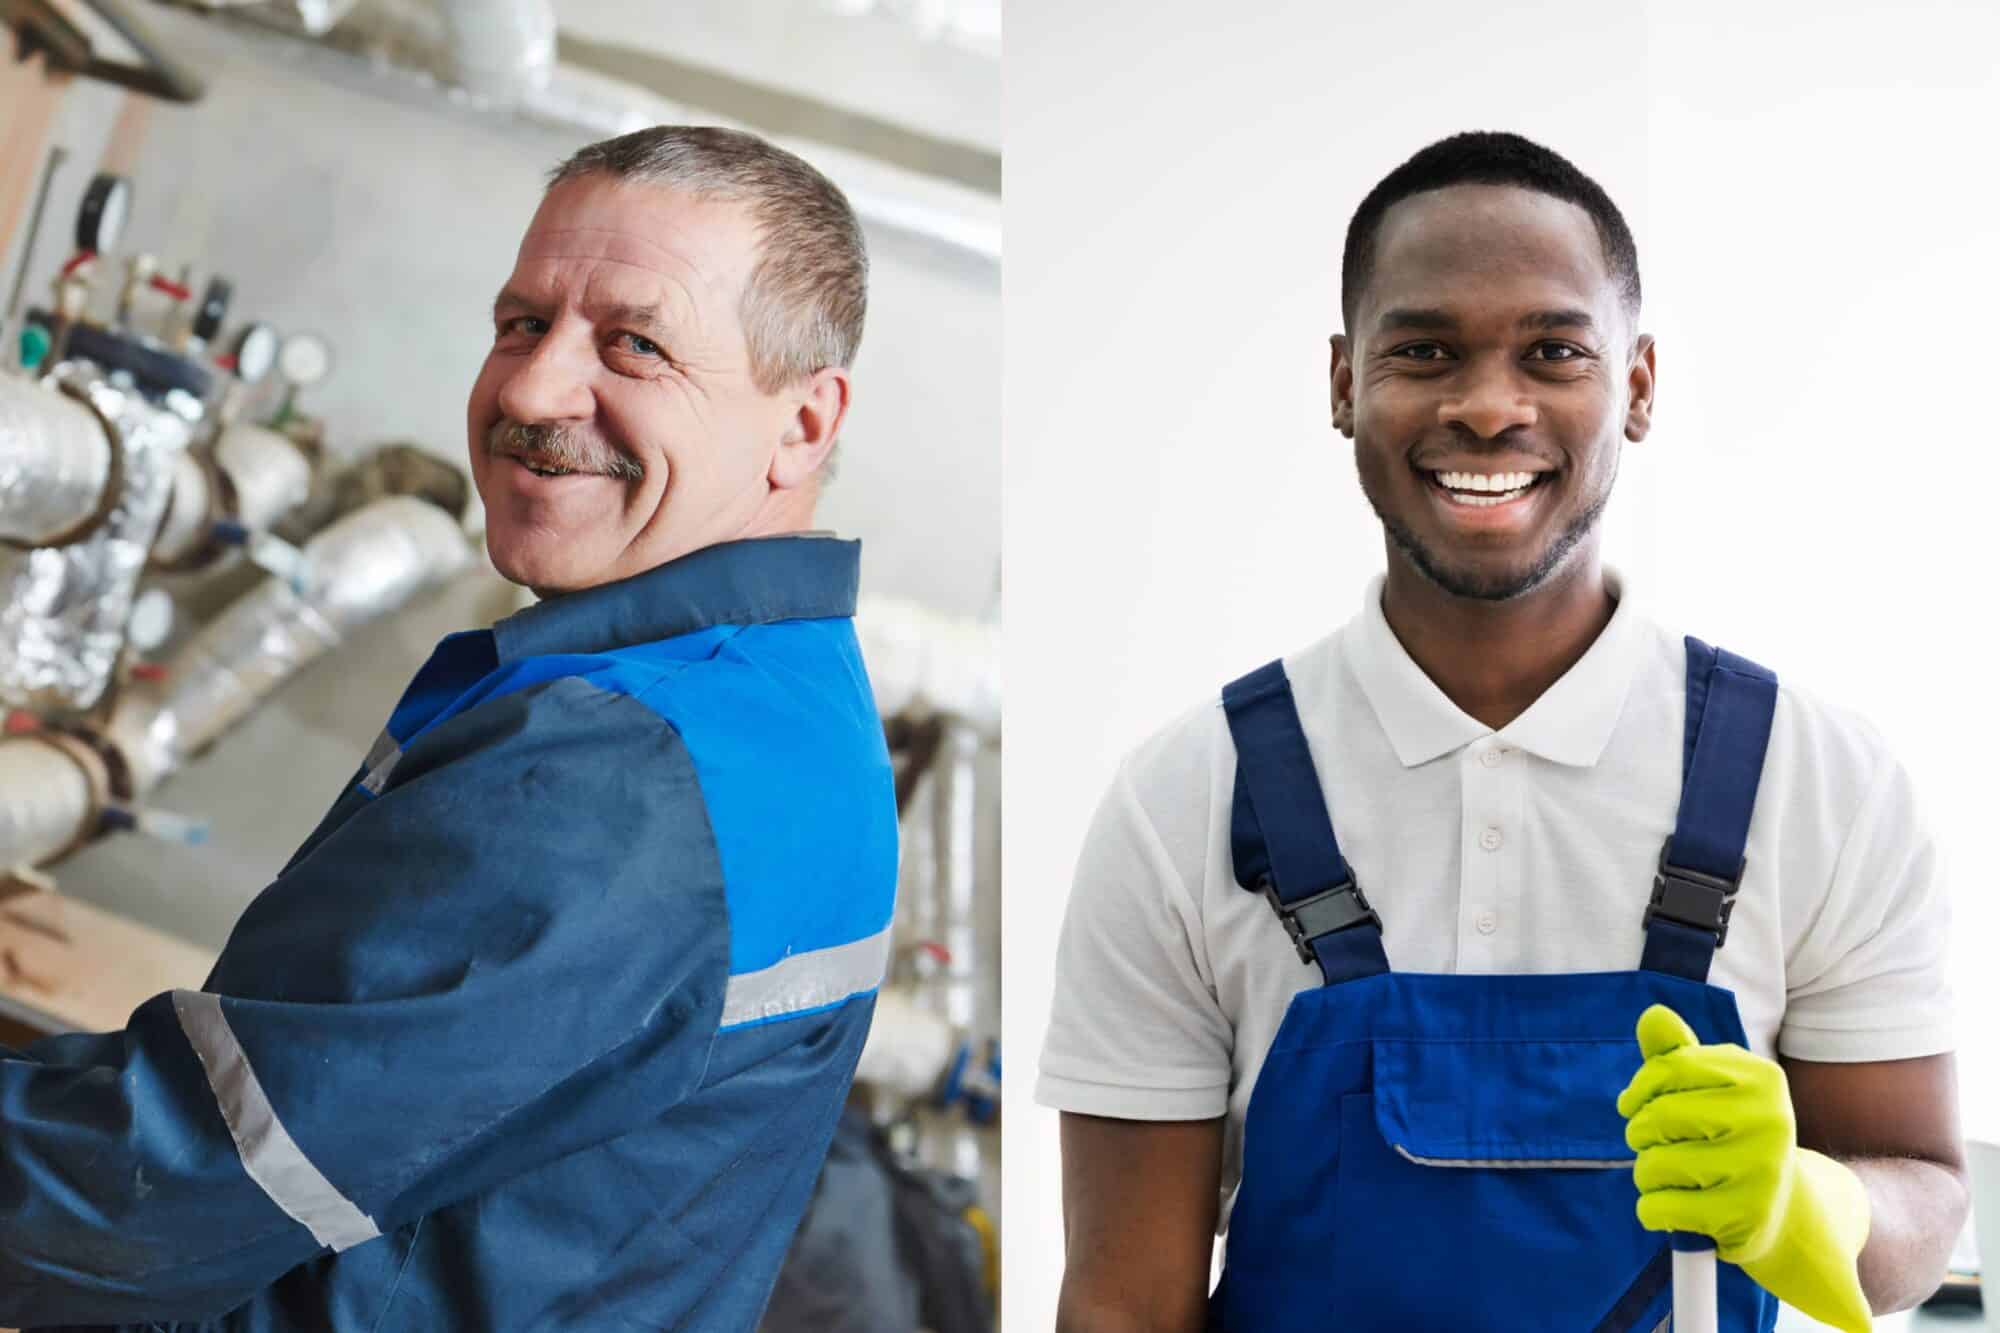 Two men smiling while engaged in maintenance work of fixing a pipe and floor cleaning.